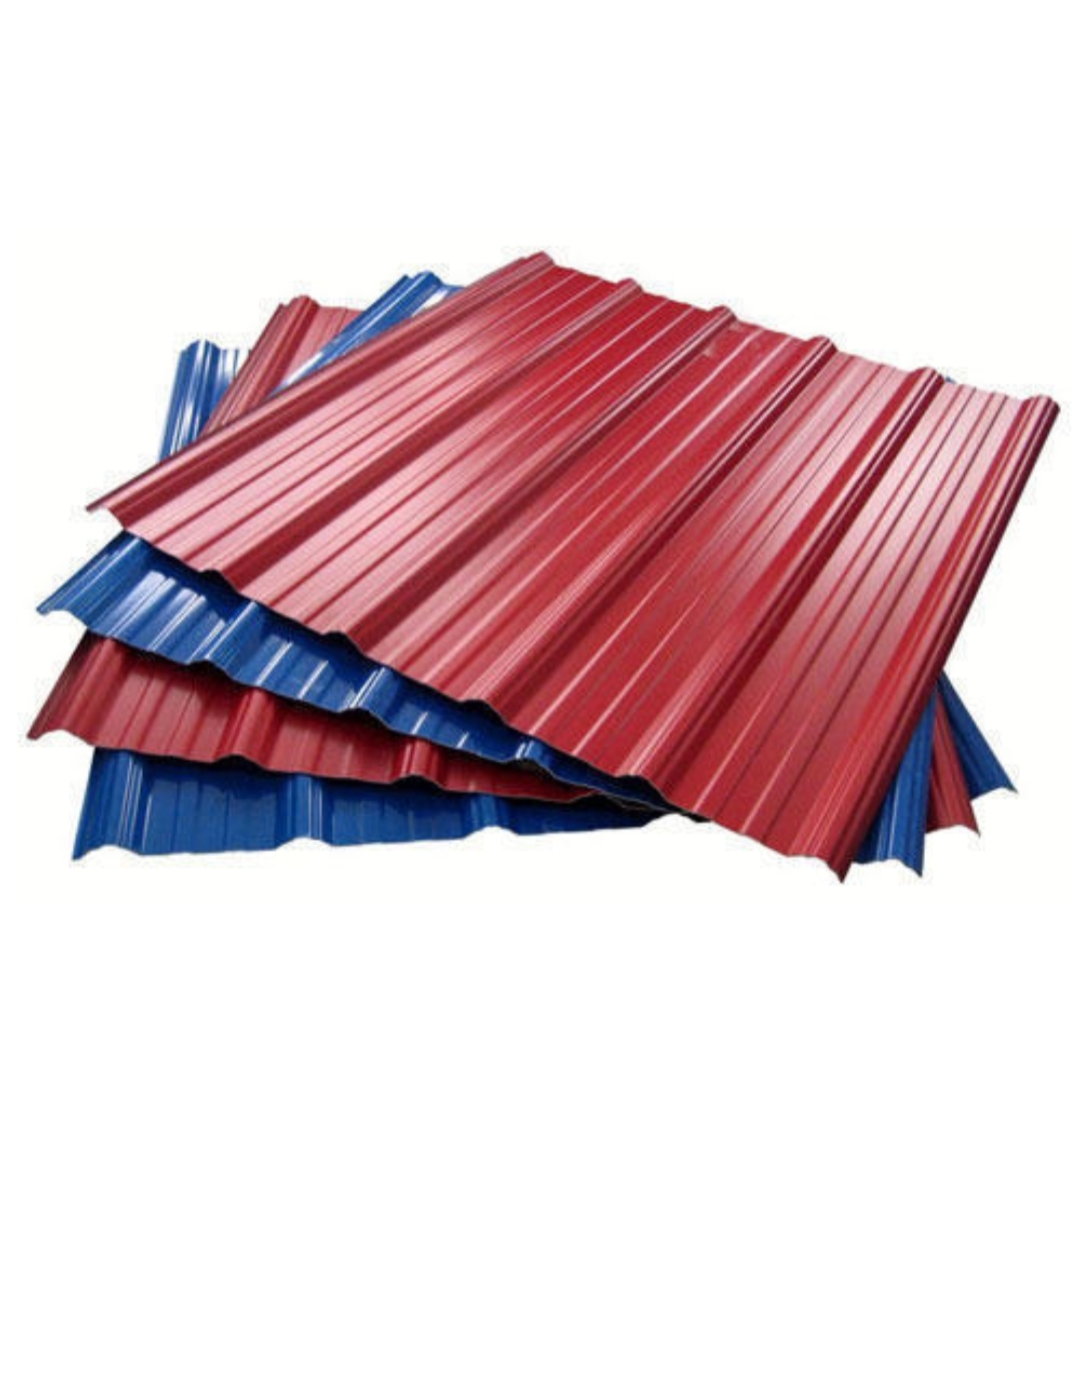 colour-metal-roofing-sheet